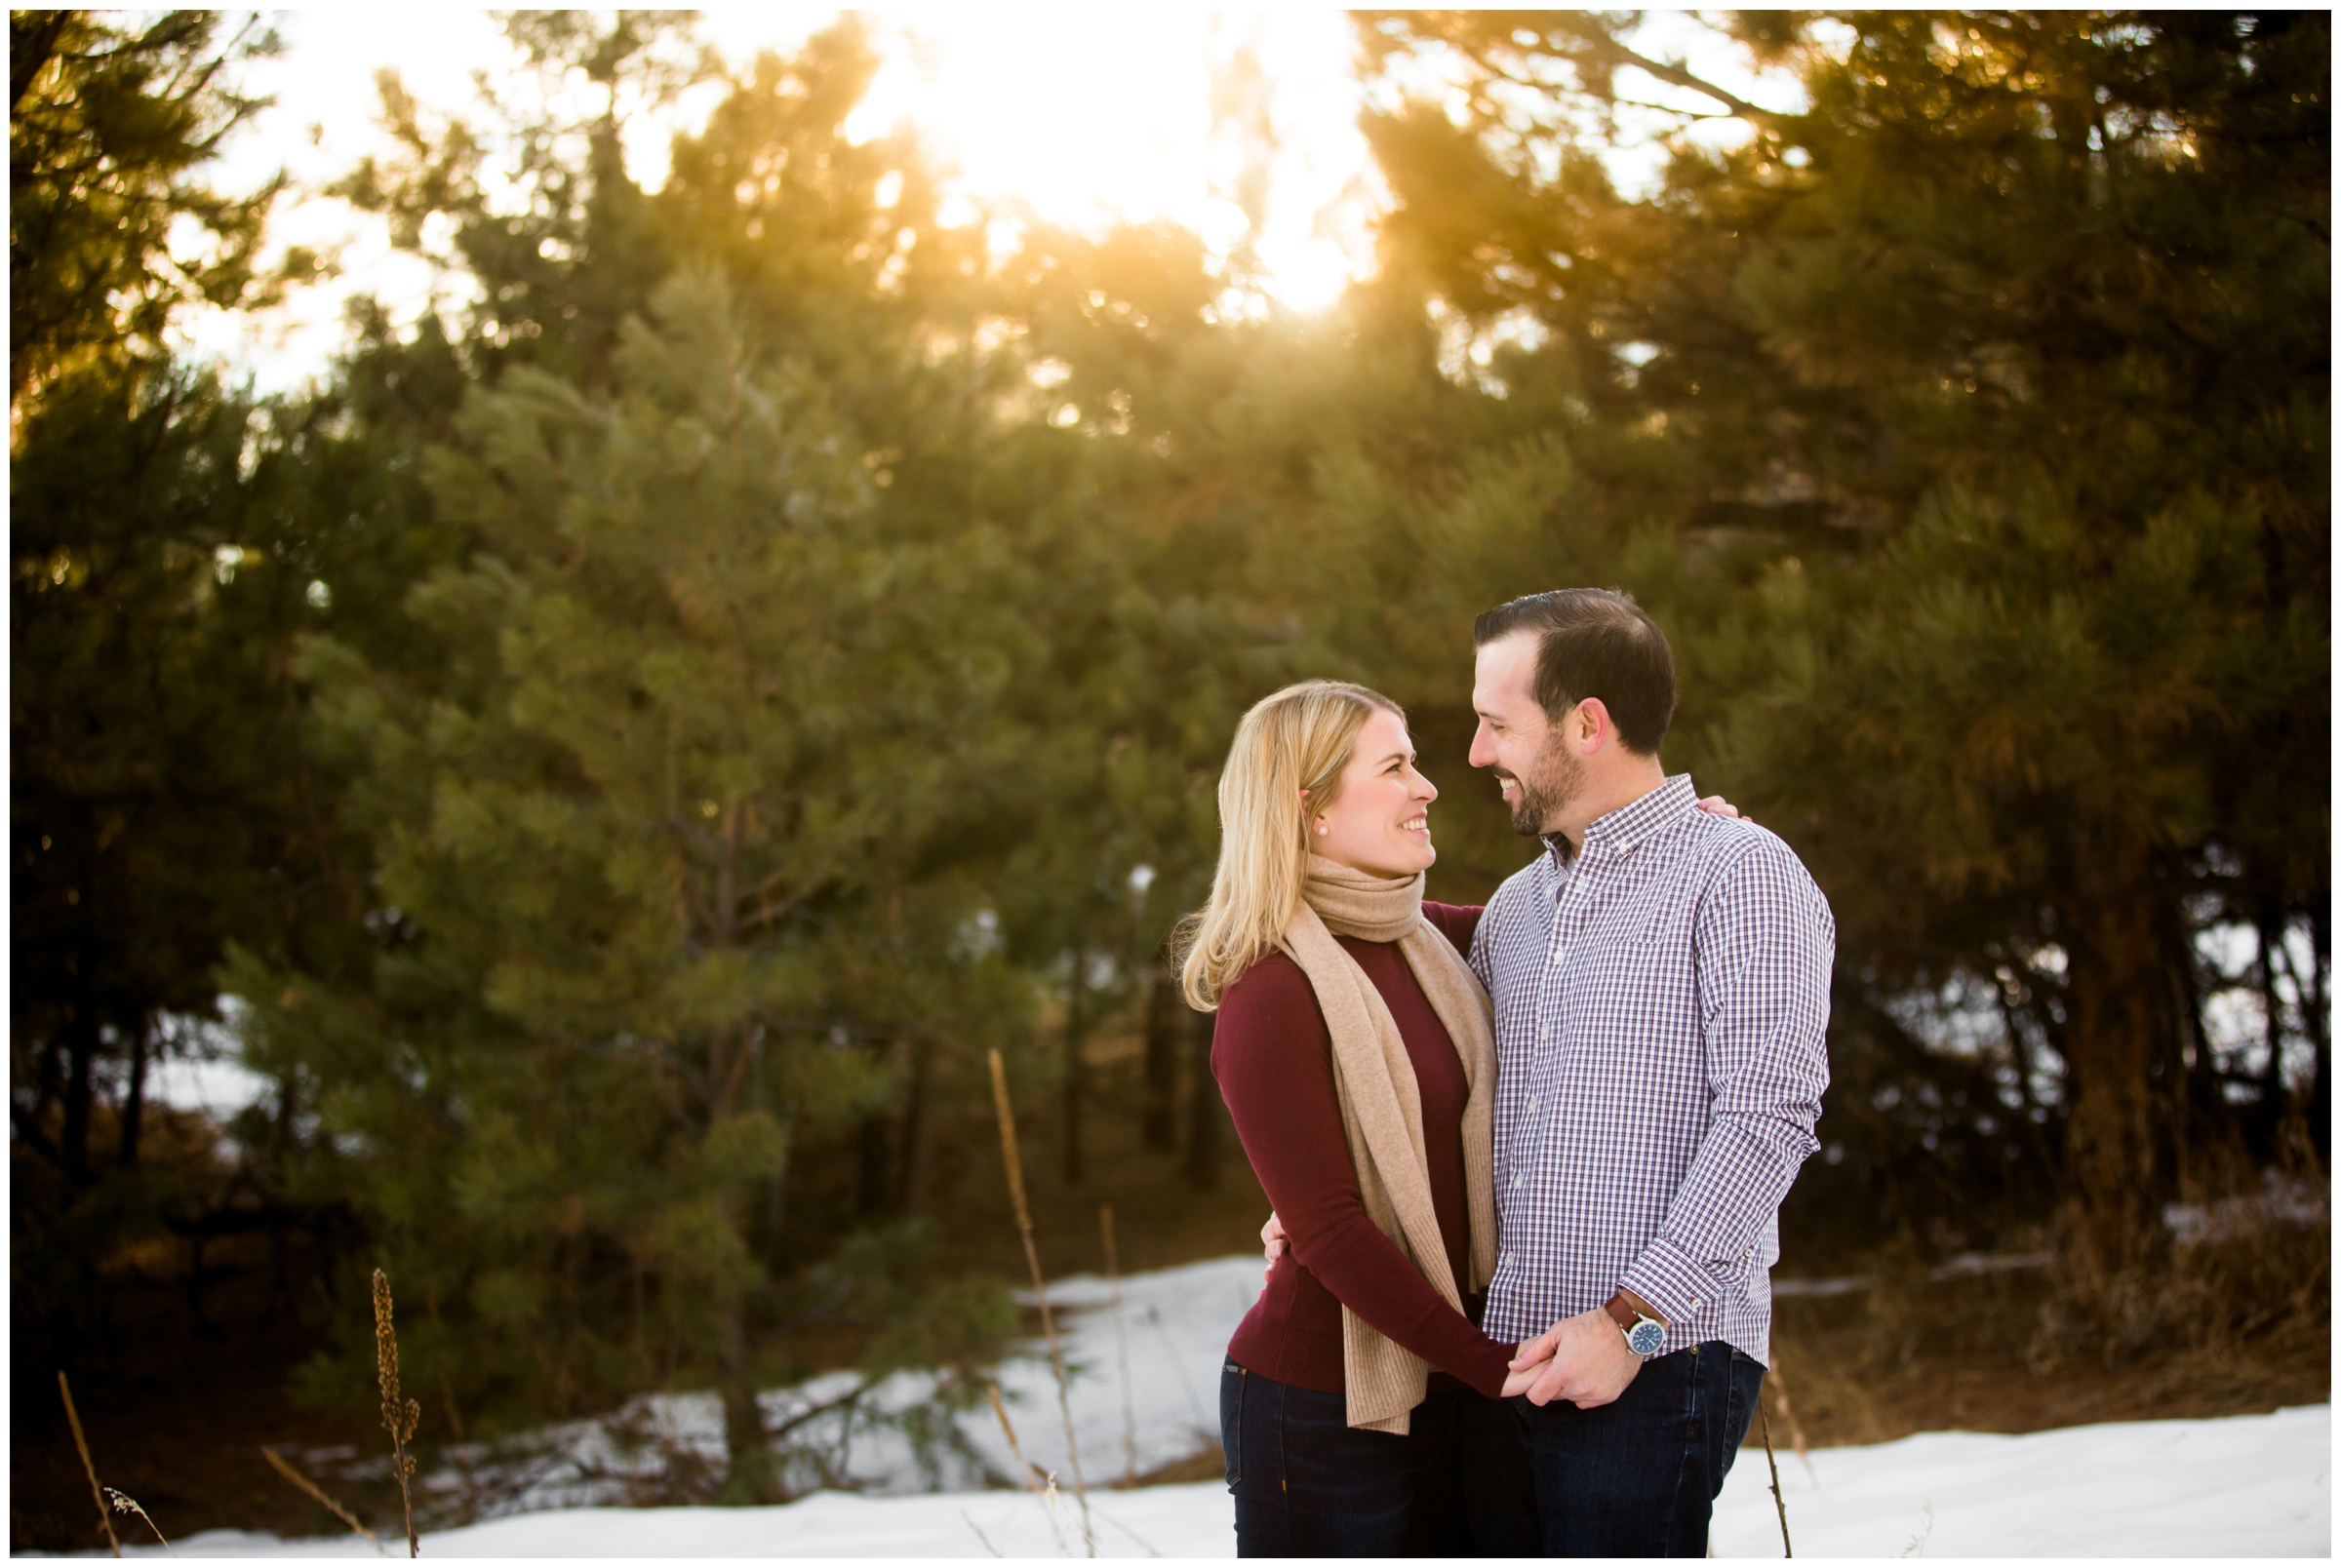 sunny and snowy engagement photos in Colorado forest 